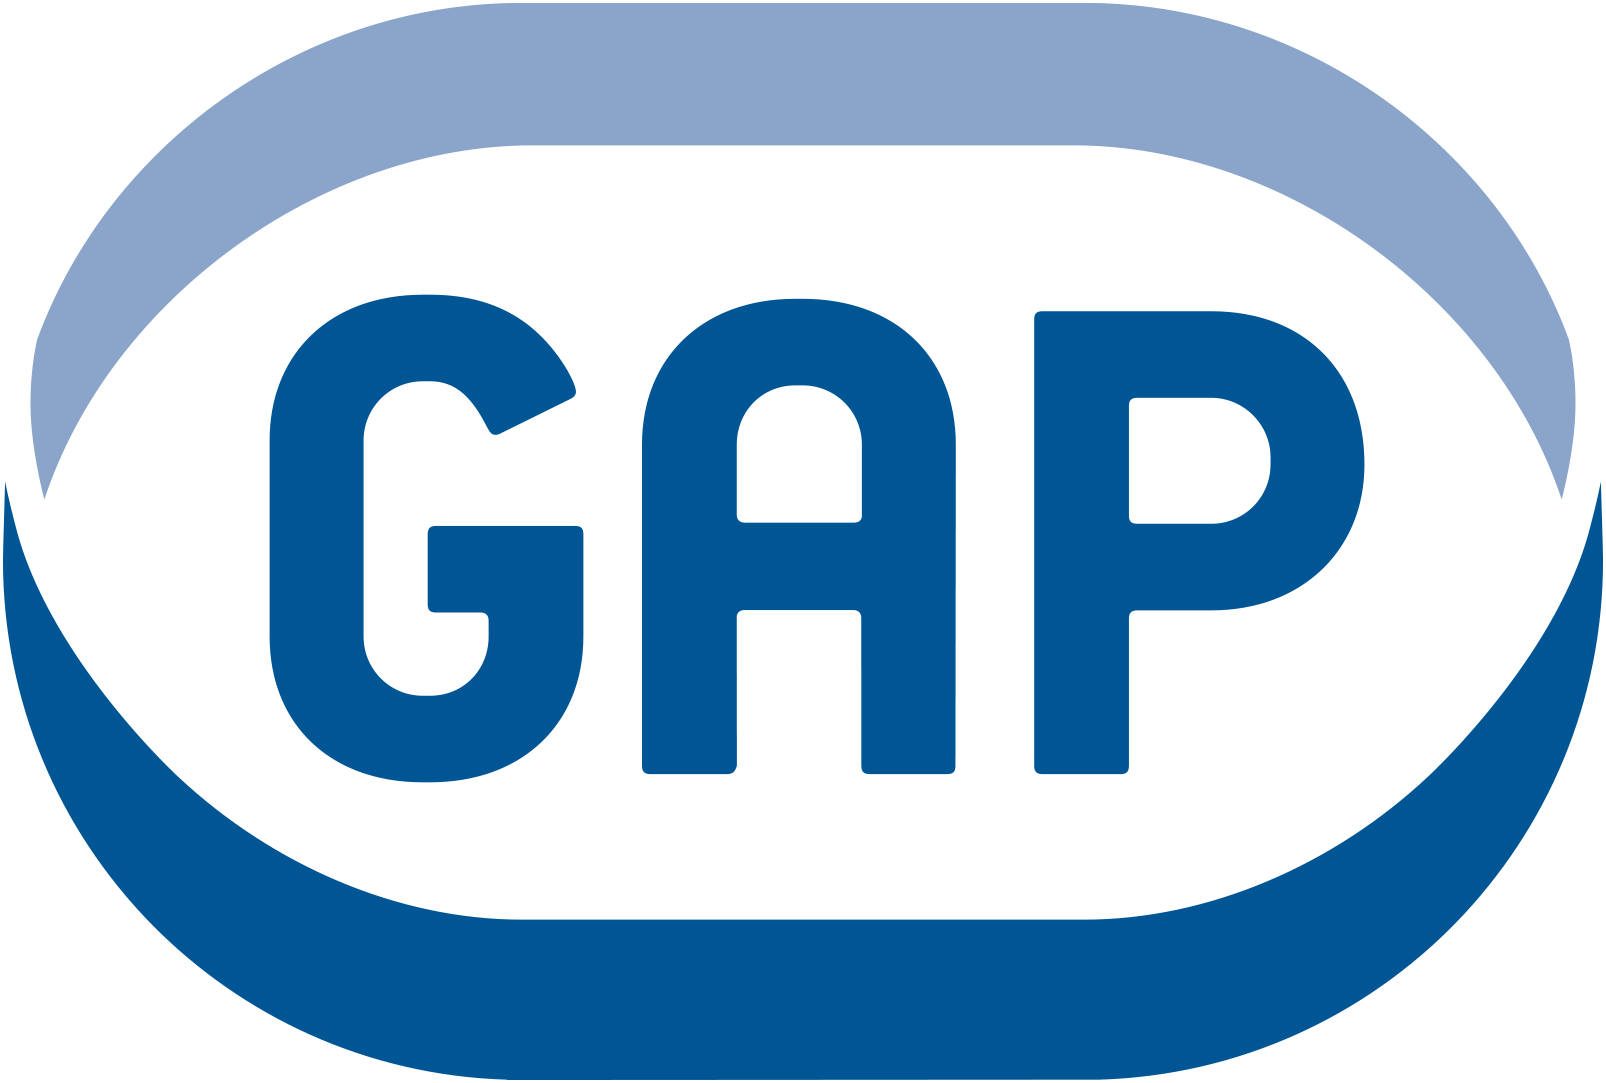 About – GAP